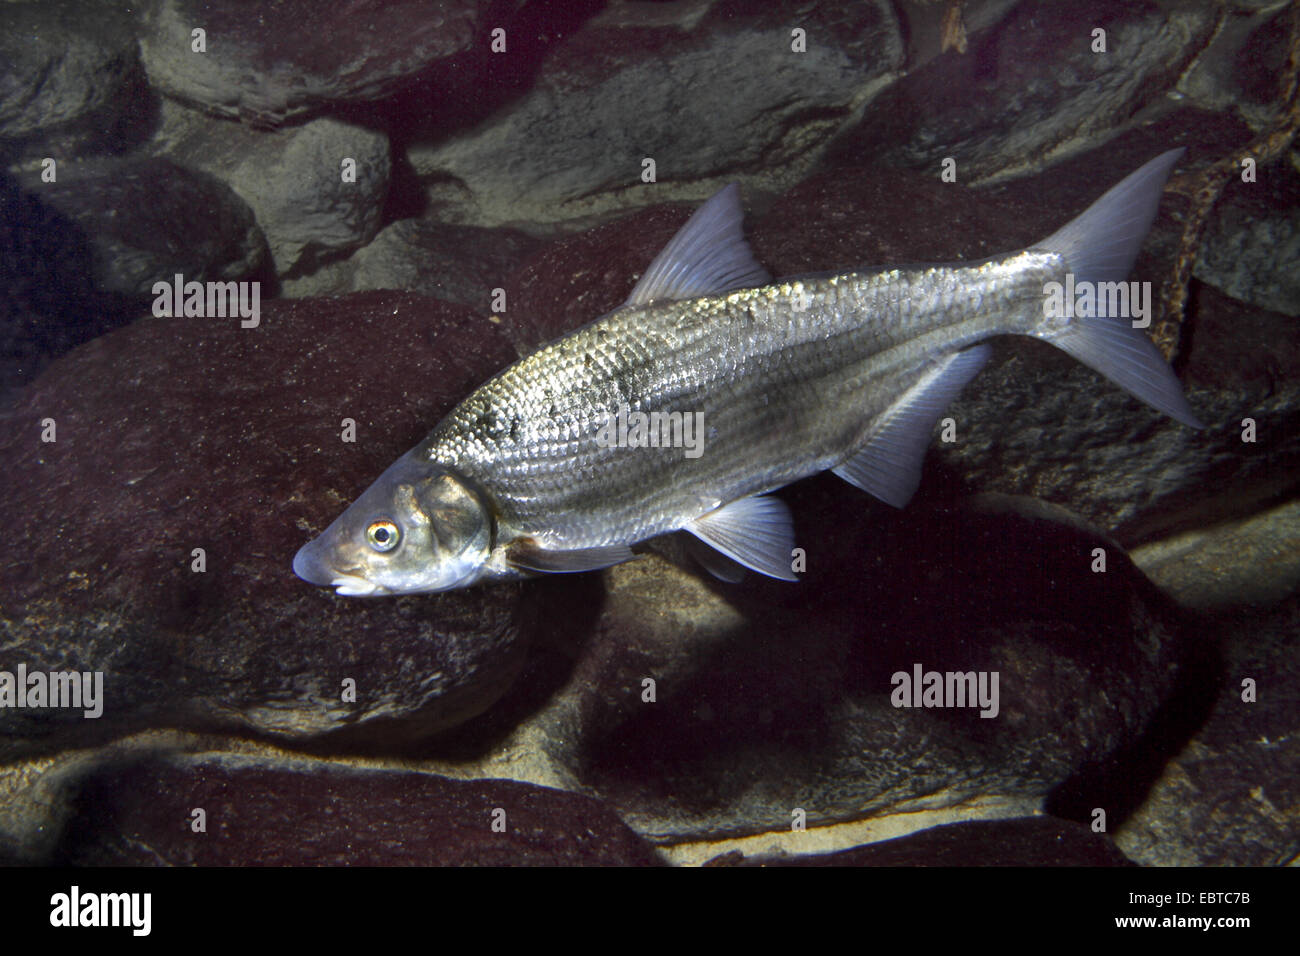 East European bream, zaehrte, Baltic vimba, Vimba bream, Vimba, Zanthe, Zarte (Vimba vimba, Abramis vimba), swimming at the bottom of a river covered with stones Stock Photo